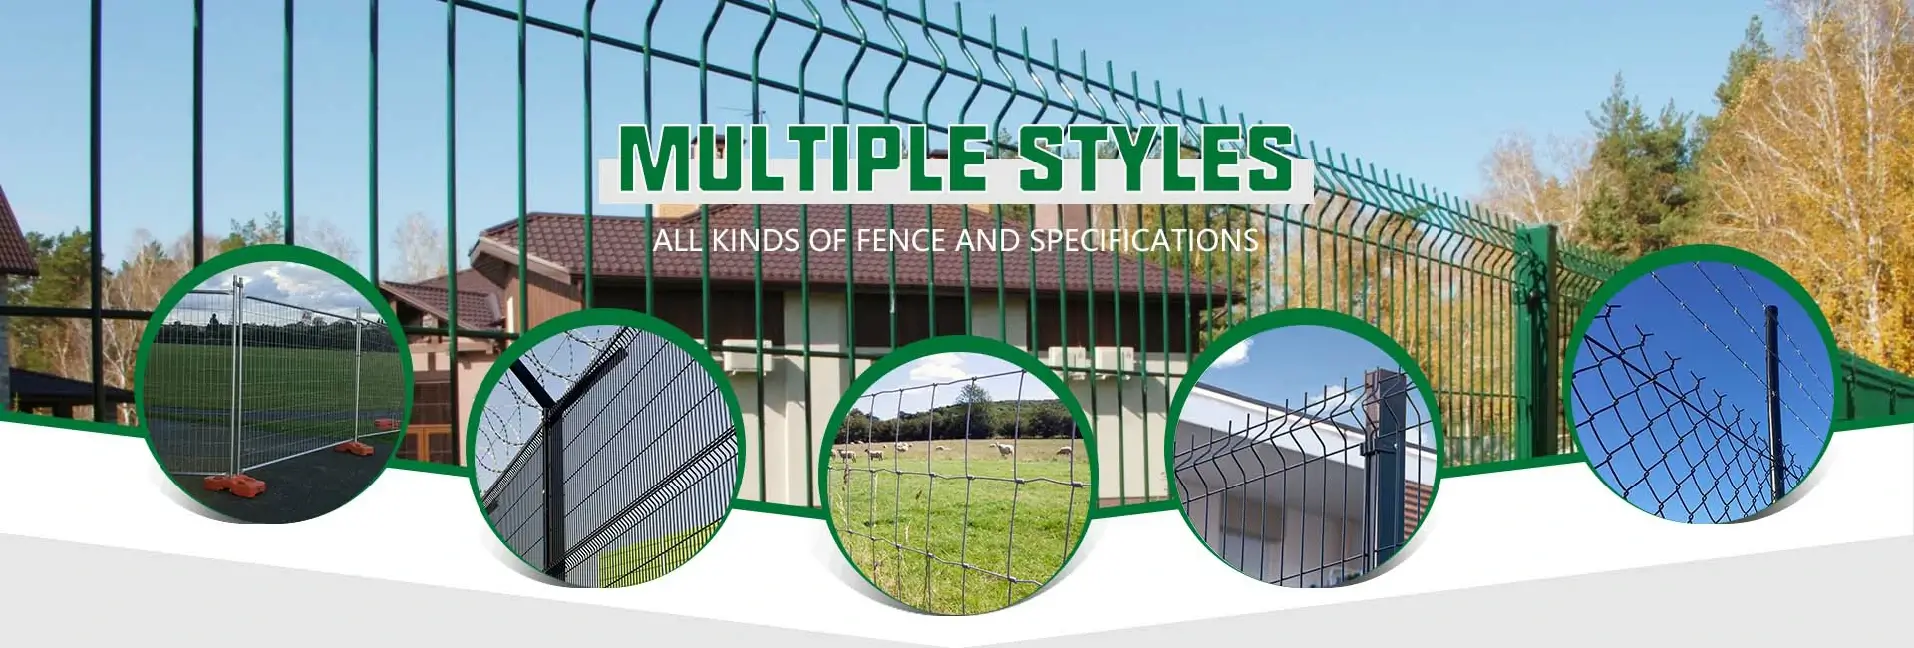 GALVANIZED &PVC COATED WELDED WIRE MESH FENCE FENCE AND SPECIFICATIONS